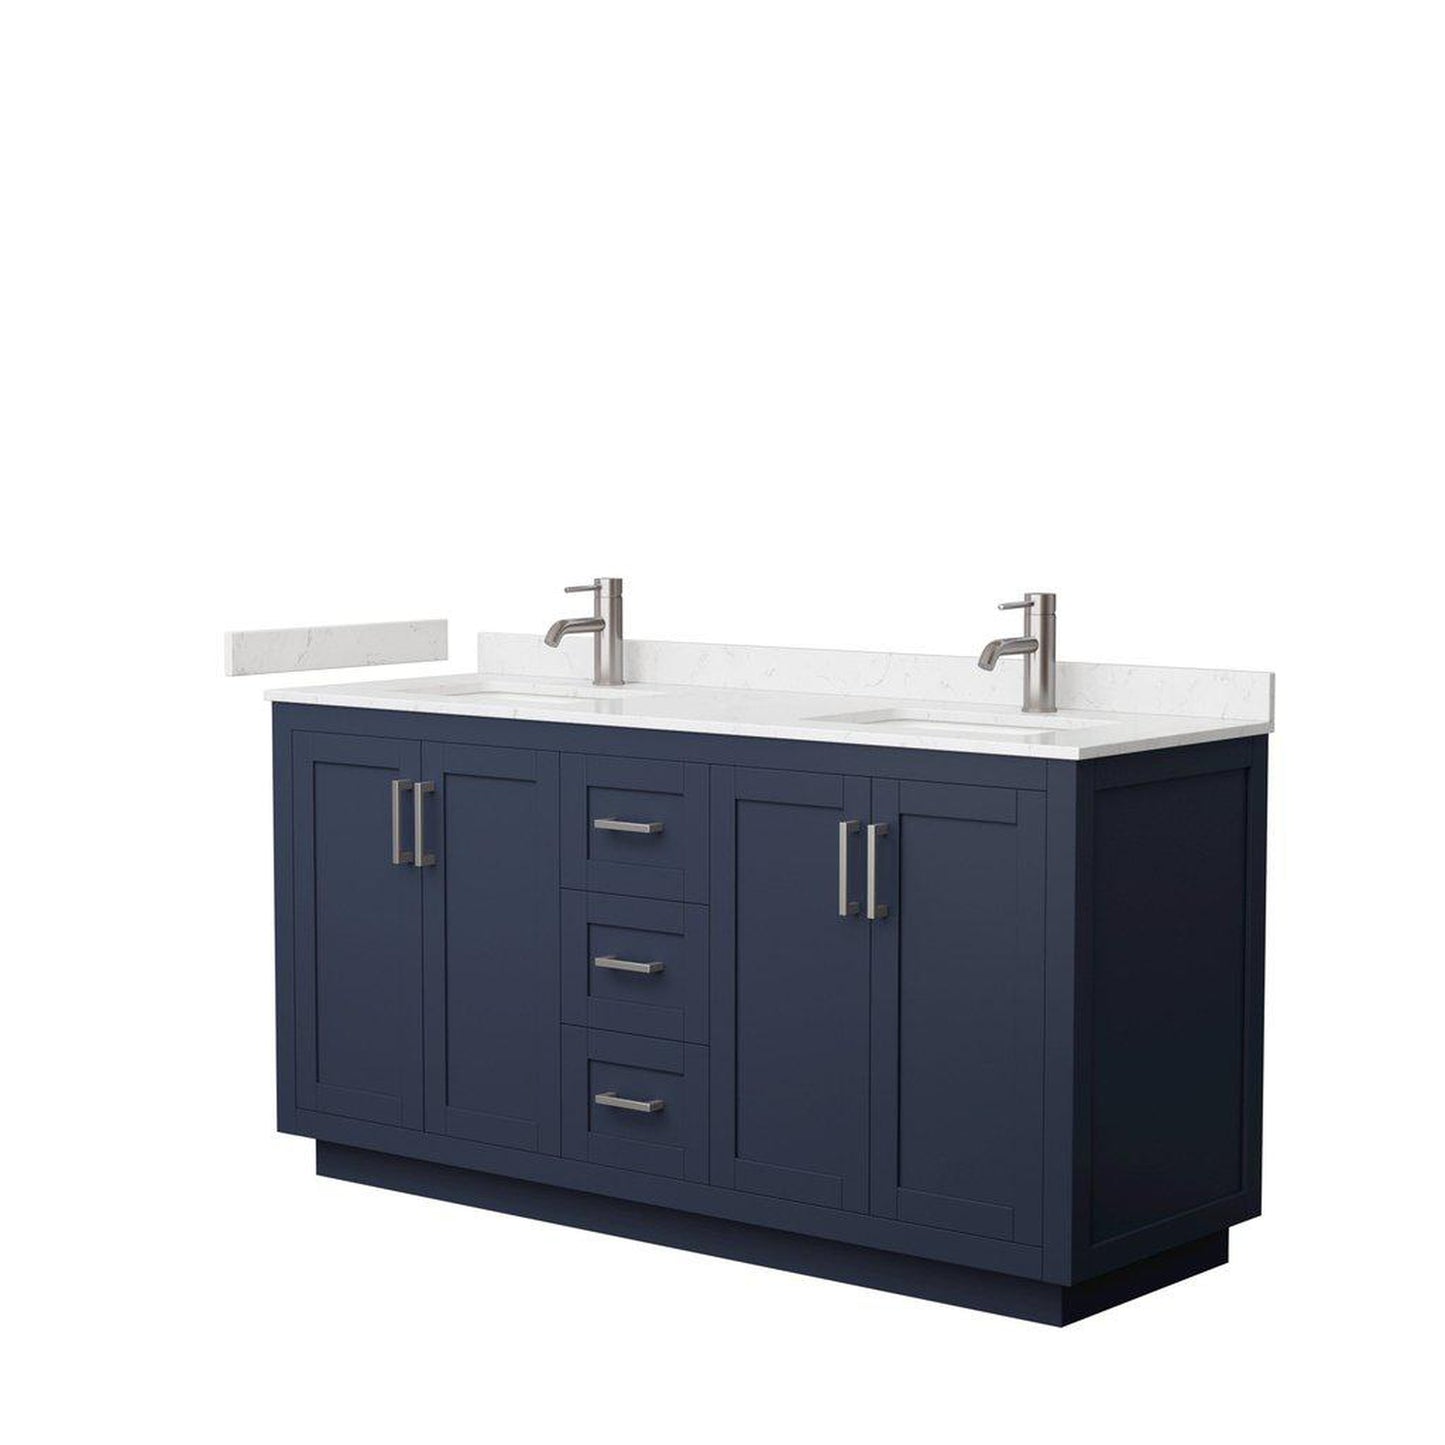 Wyndham Collection Miranda 66" Double Bathroom Dark Blue Vanity Set With Light-Vein Carrara Cultured Marble Countertop, Undermount Square Sink, And Brushed Nickel Trim